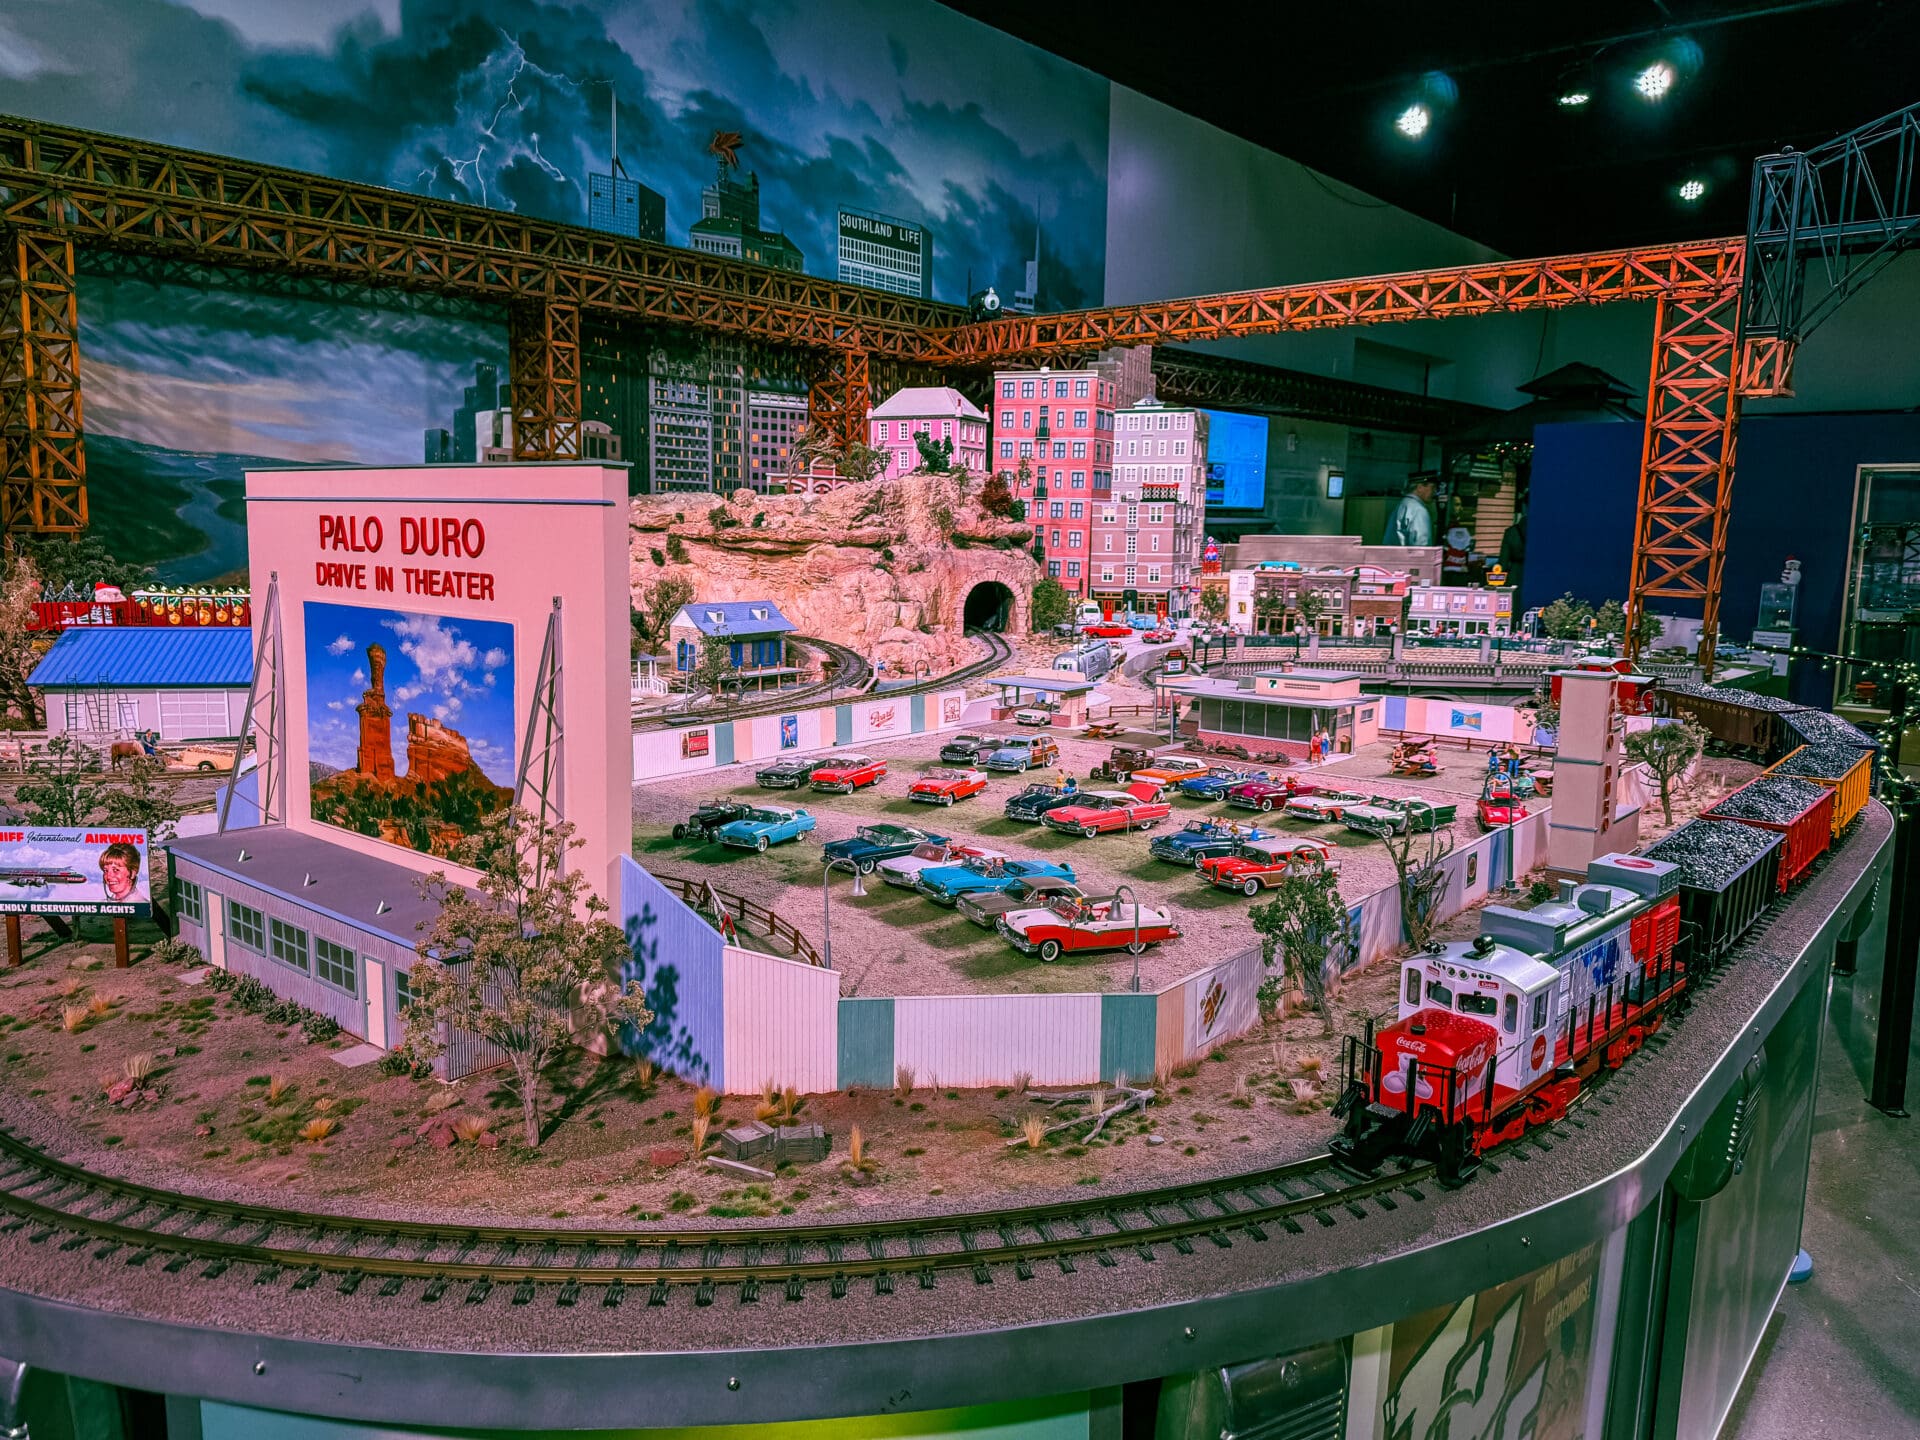 TrainTopia at the Frisco Discovery Center